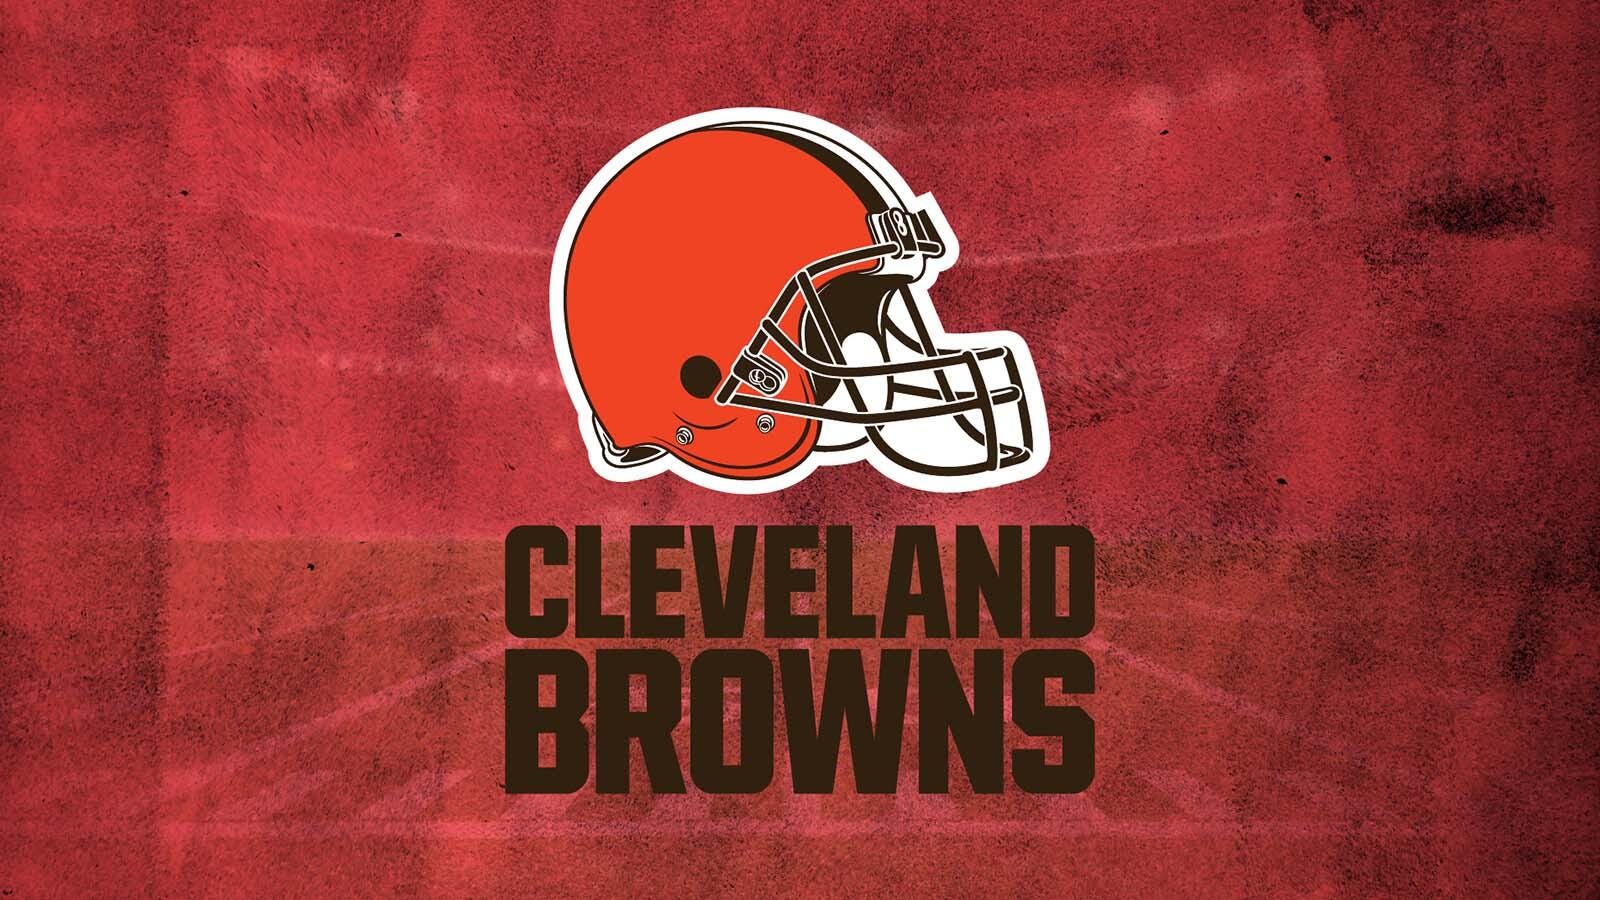 channel cleveland browns game today